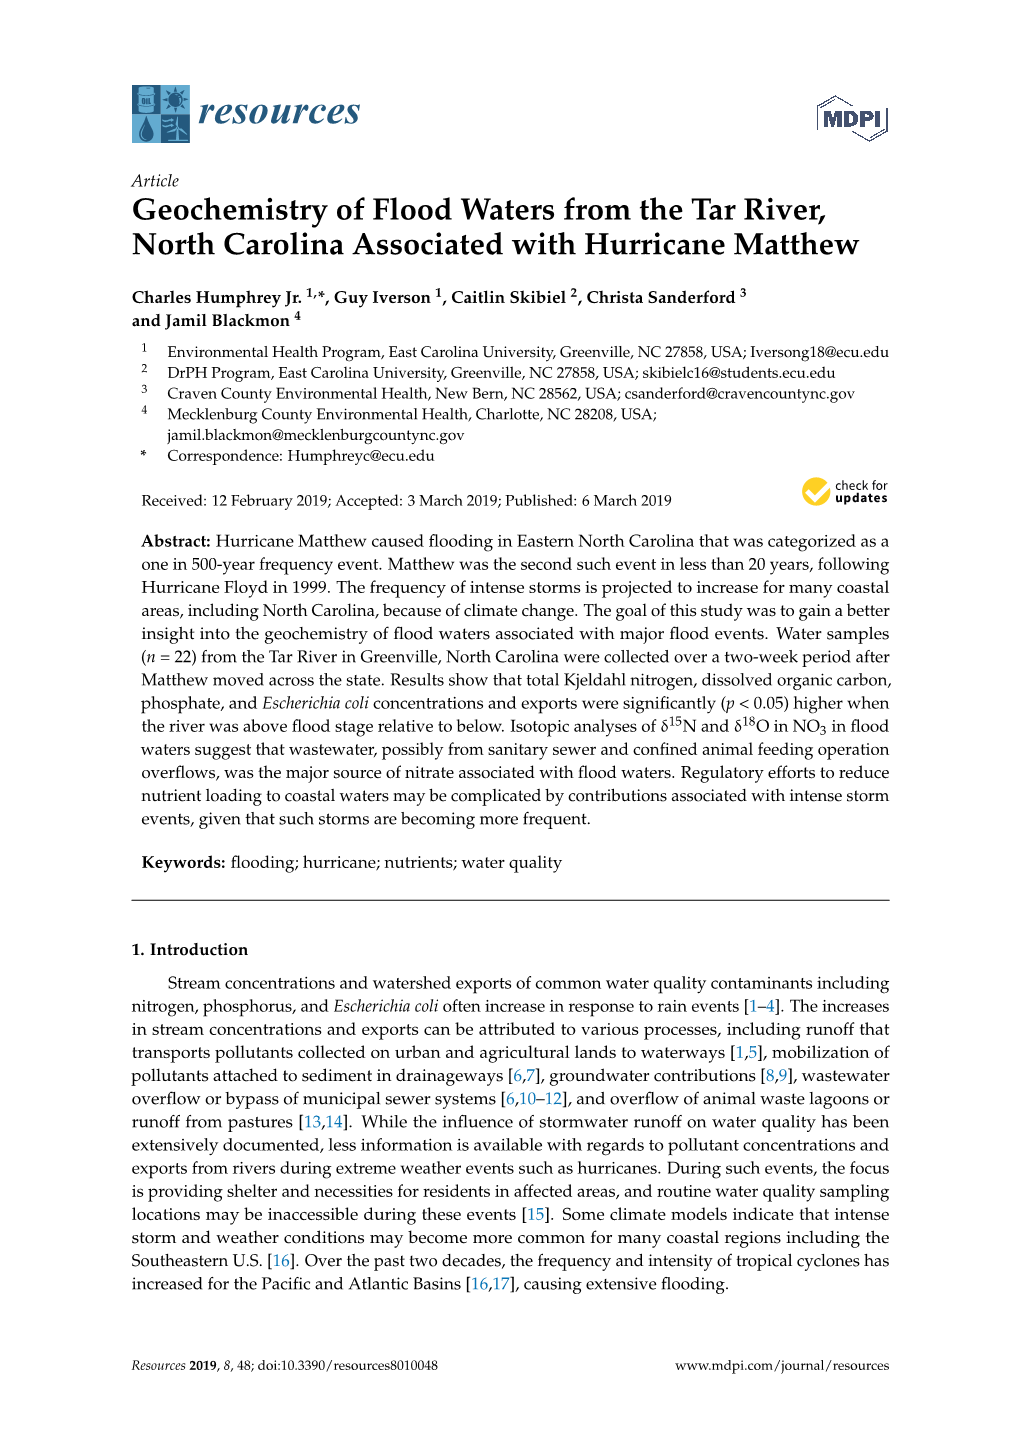 Geochemistry of Flood Waters from the Tar River, North Carolina Associated with Hurricane Matthew